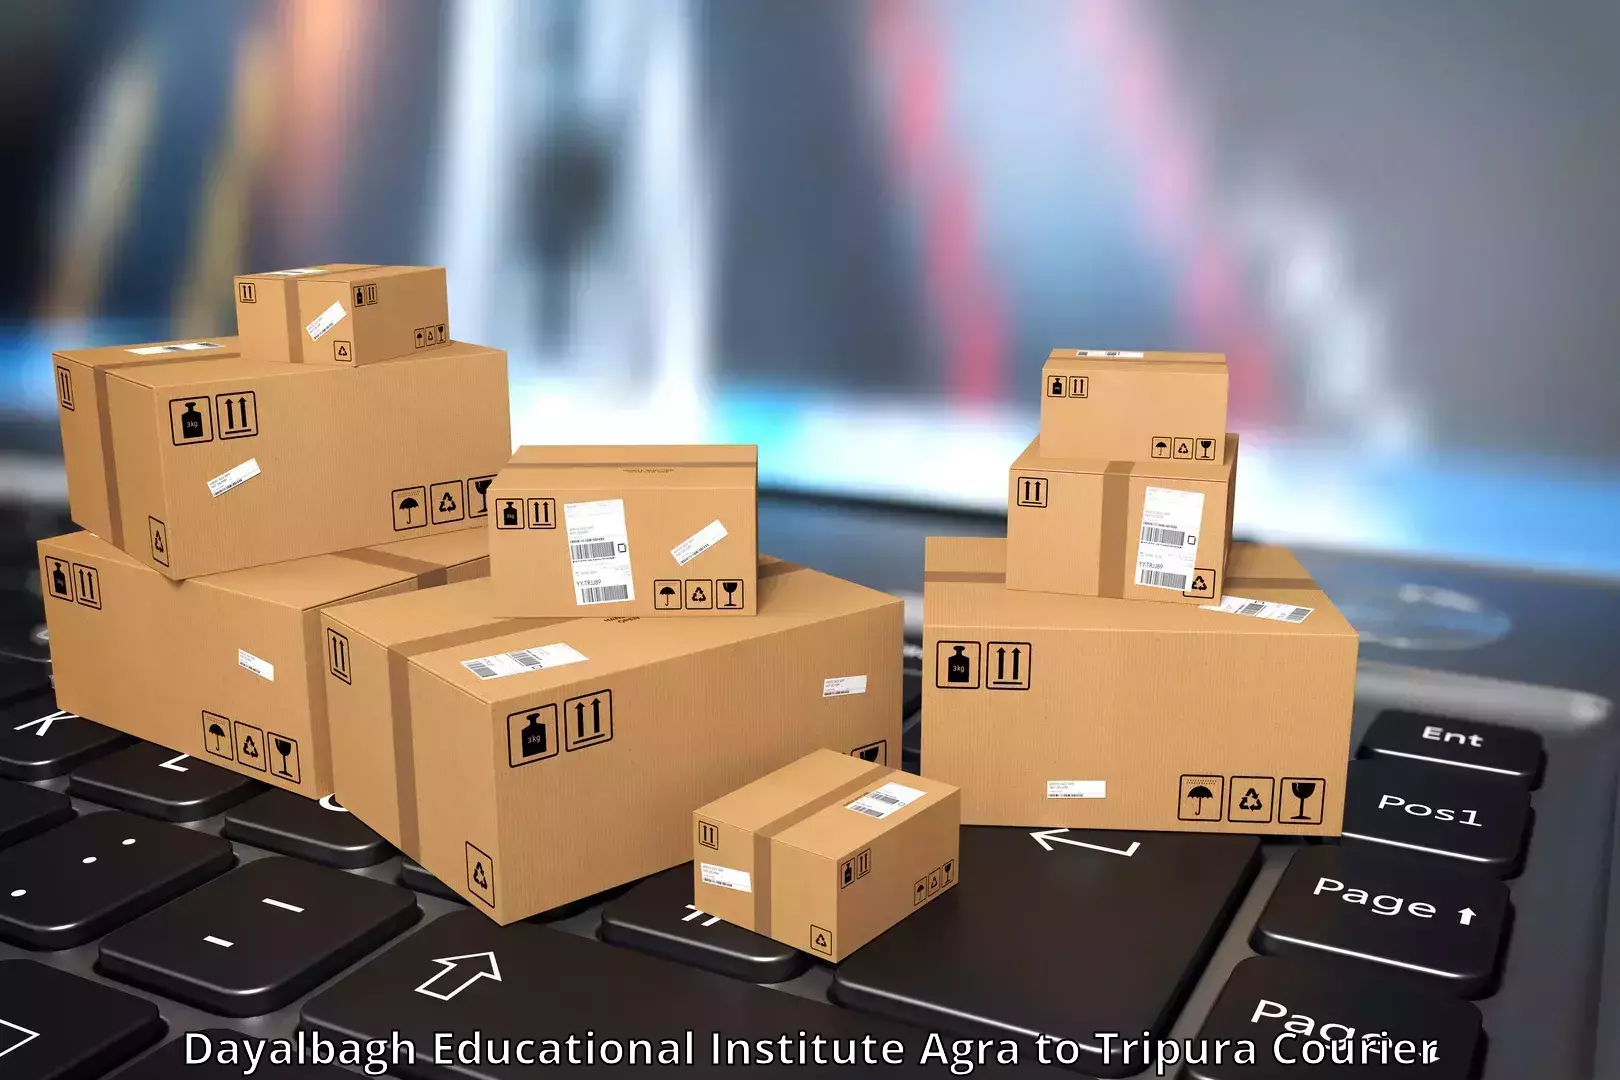 Return courier service Dayalbagh Educational Institute Agra to IIIT Agartala